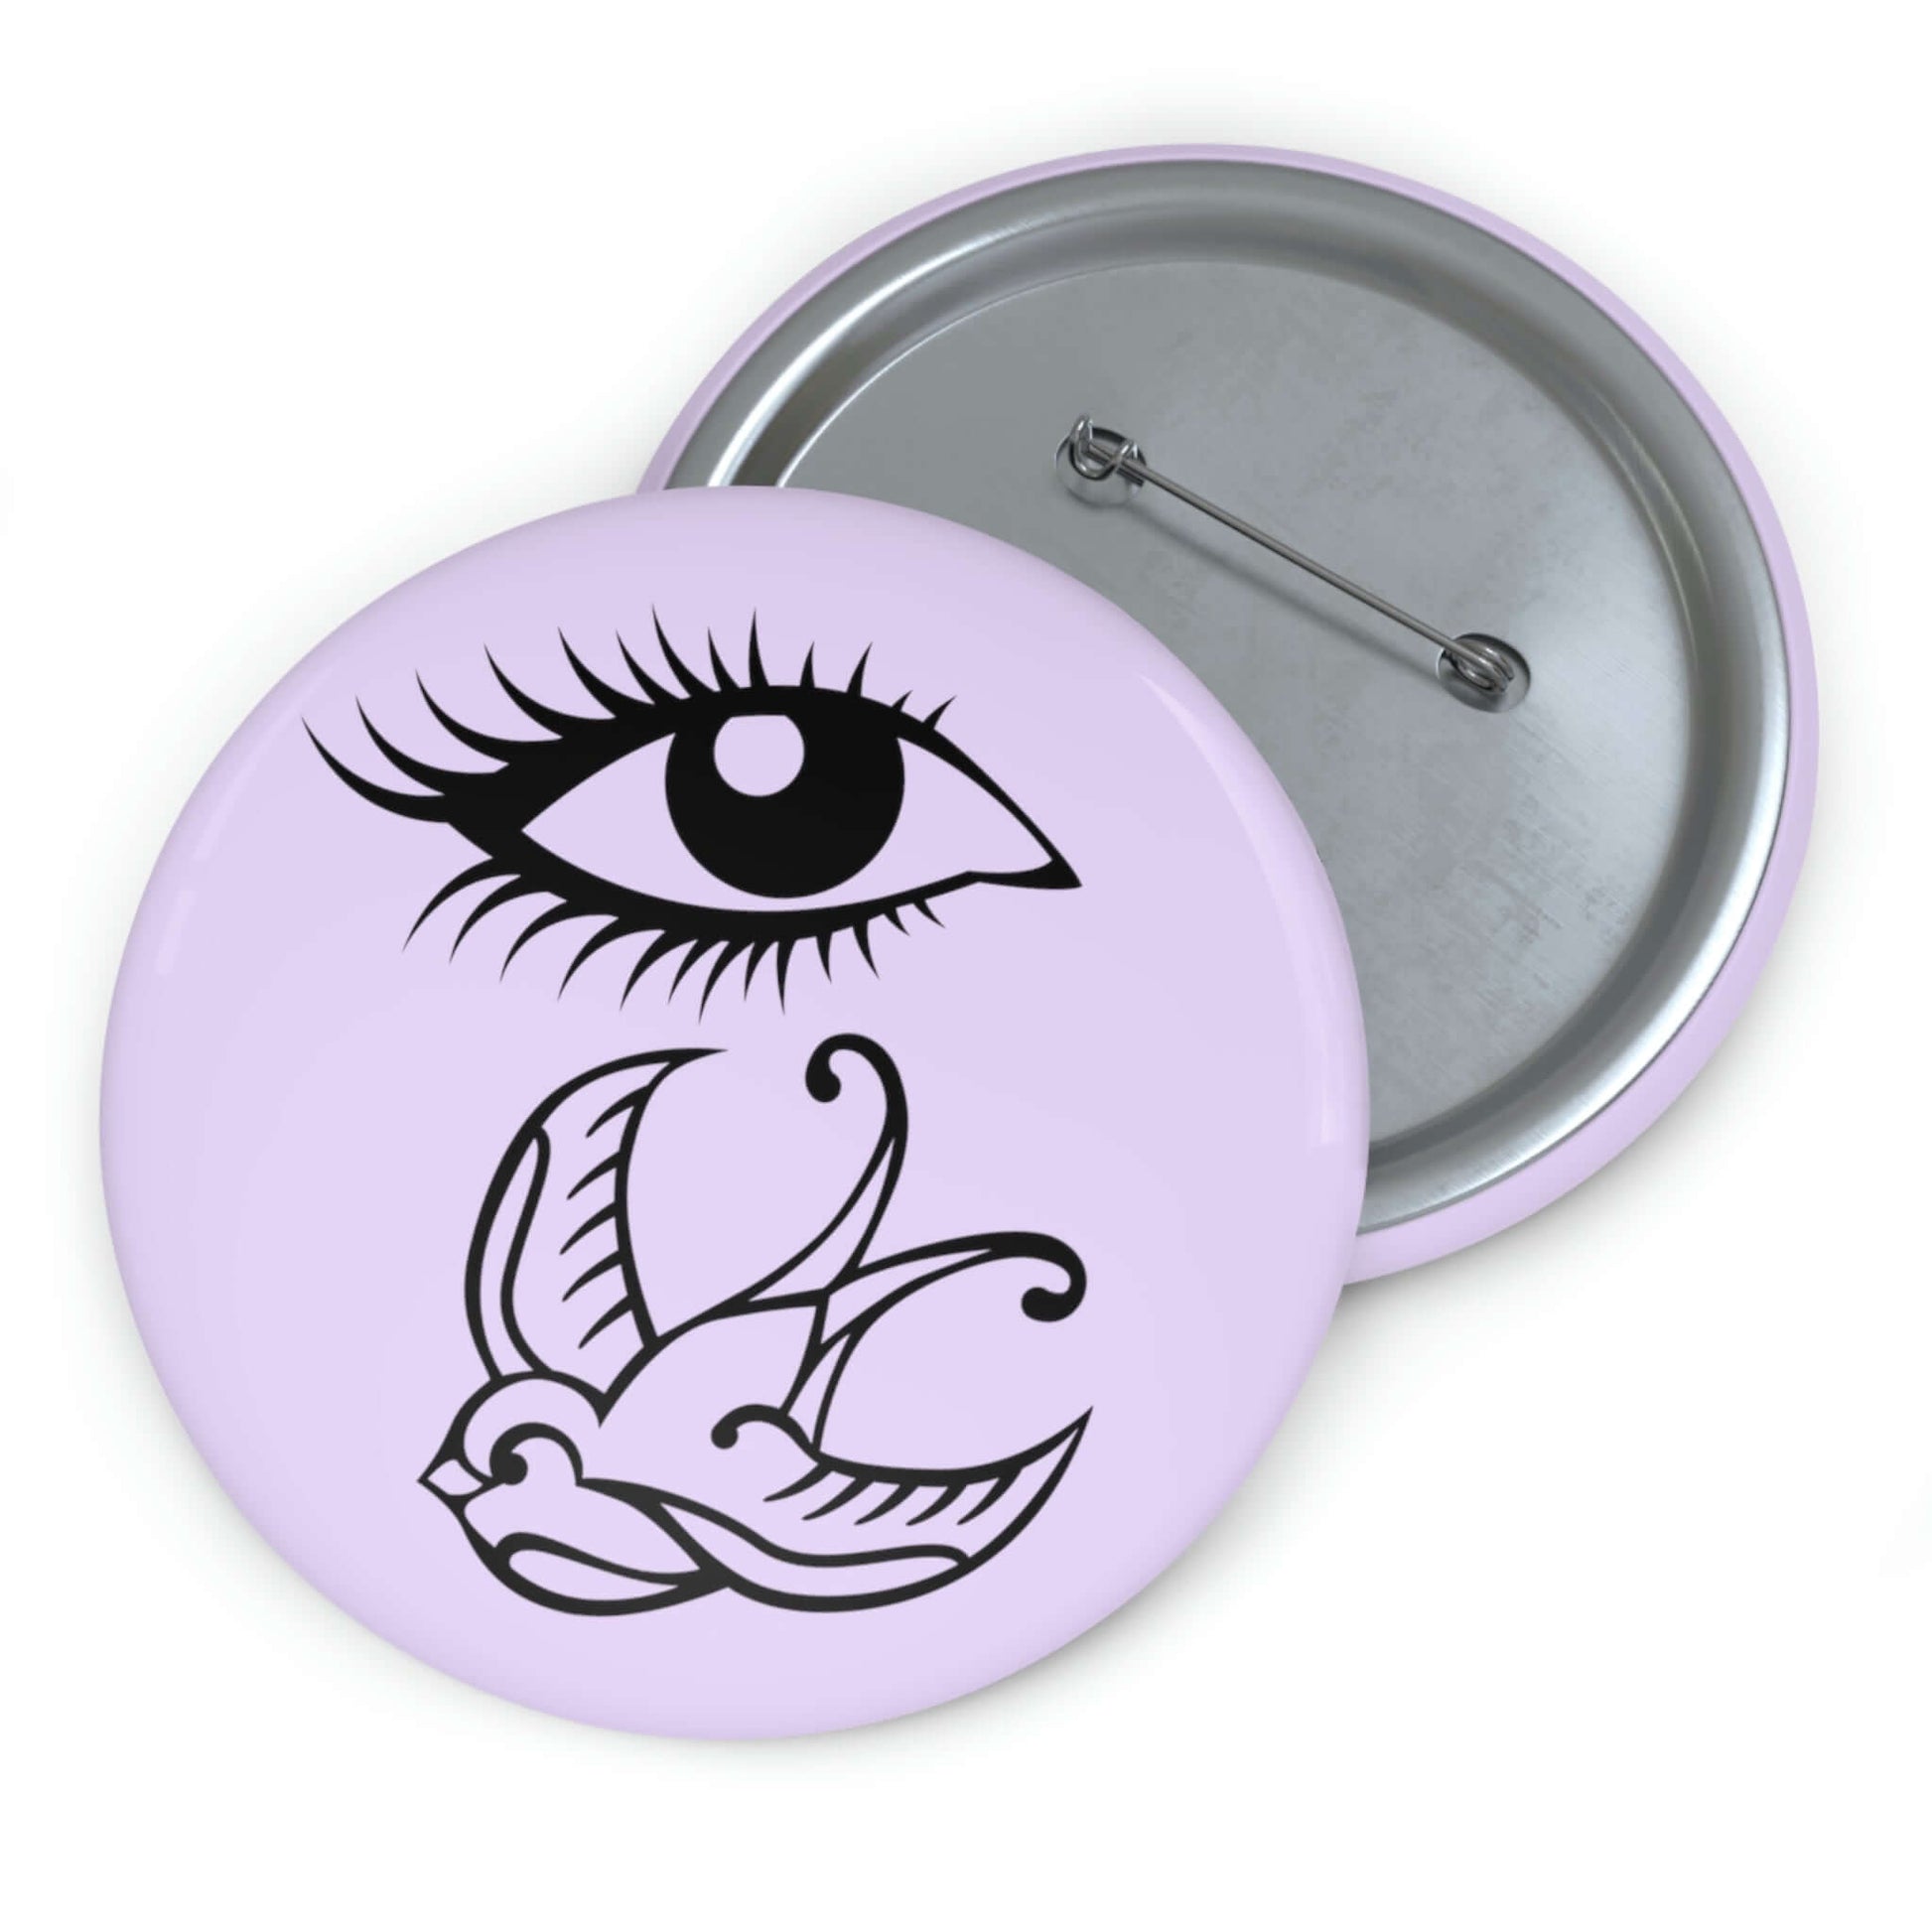 Pin-back button with image of an eye and a swallow bird on a light lavender background.